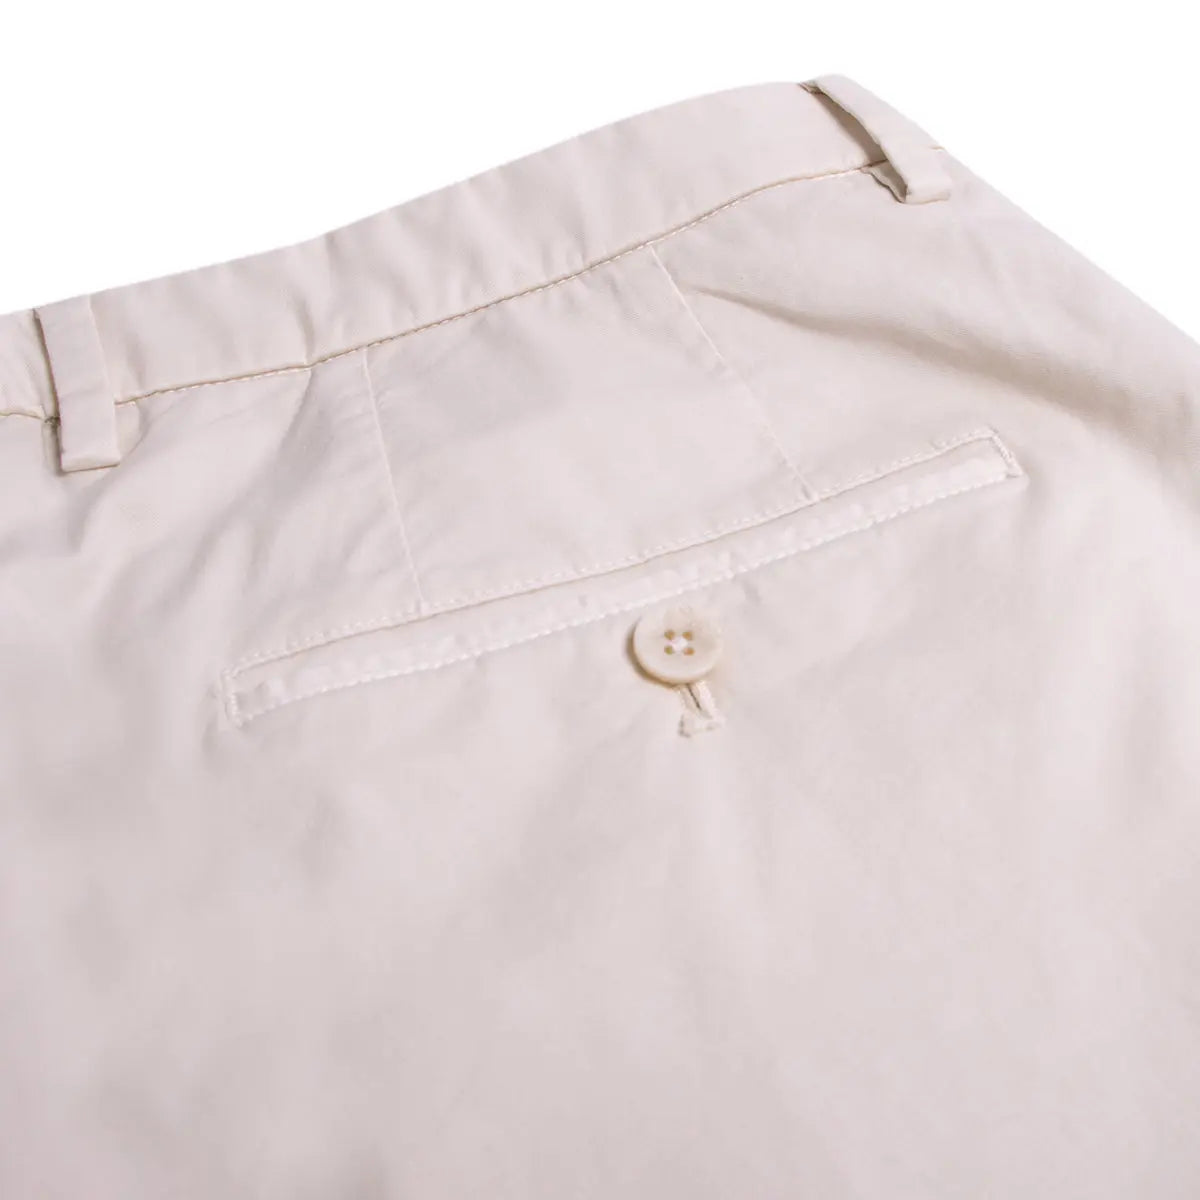 Butter Cotton Stretch Chino Shorts SHORTS Robert Old   